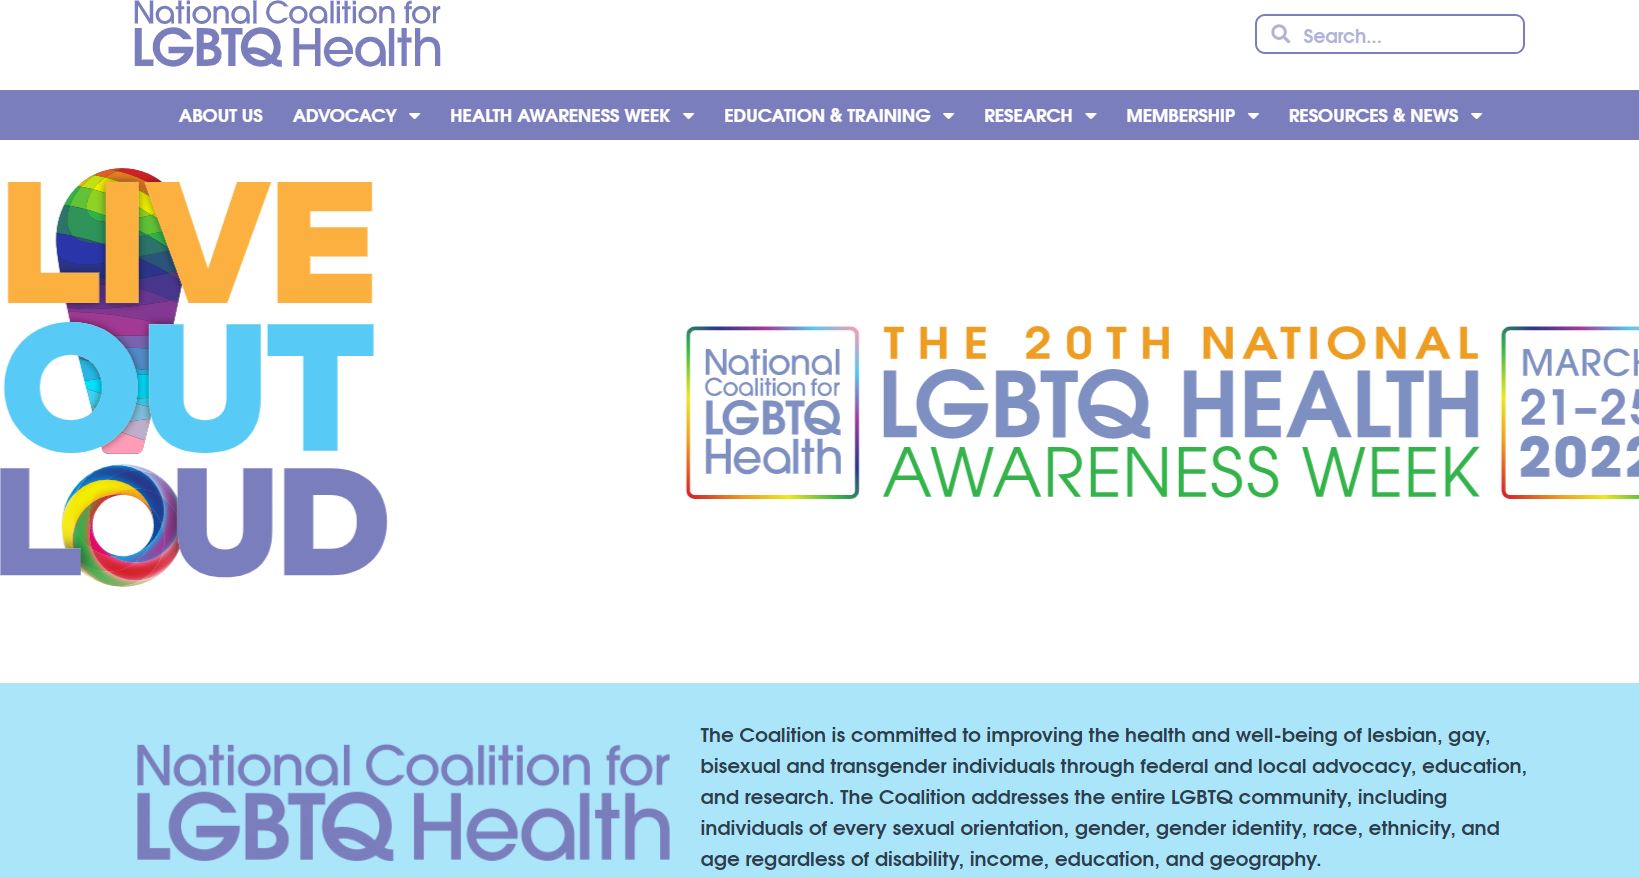 National Coalition for LGBT Health